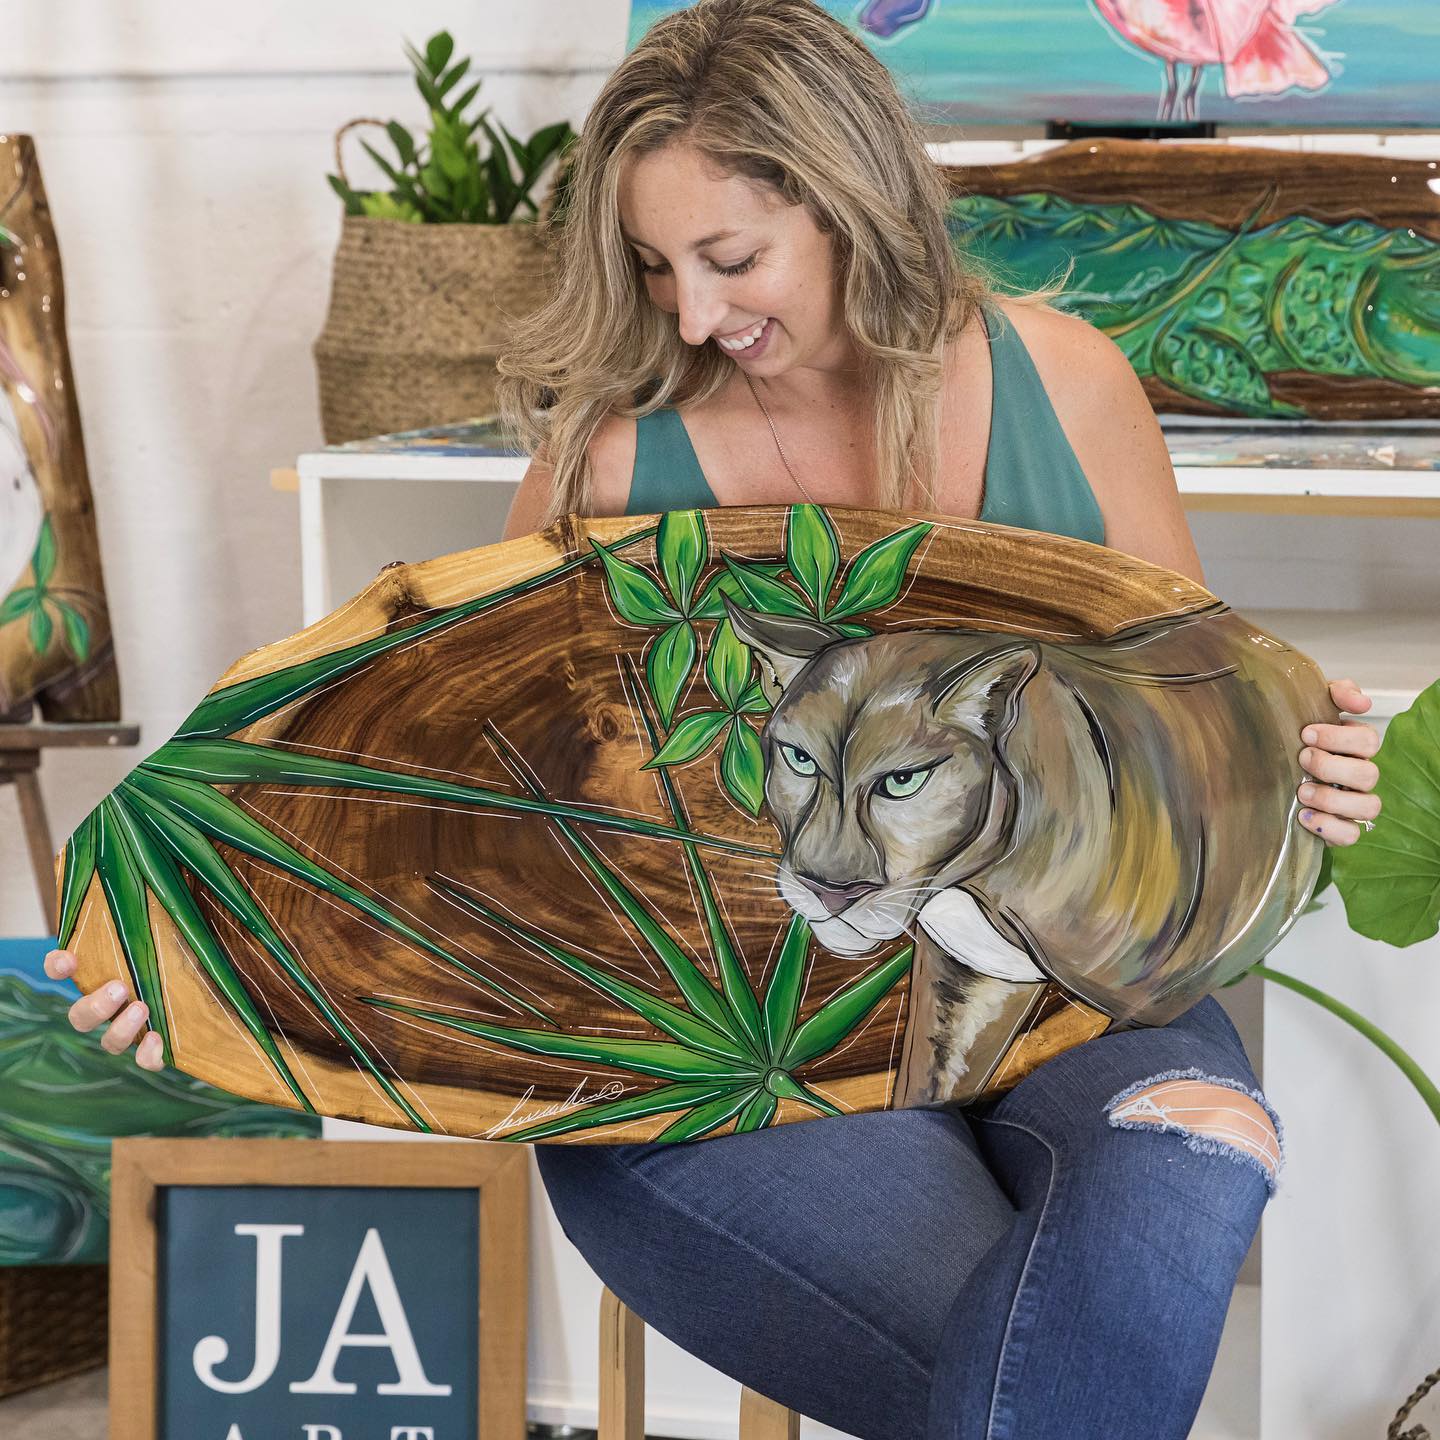 Jessica Ann's art inspires art lovers to protect the oceans and shorelines through her brightly colored brushstrokes.